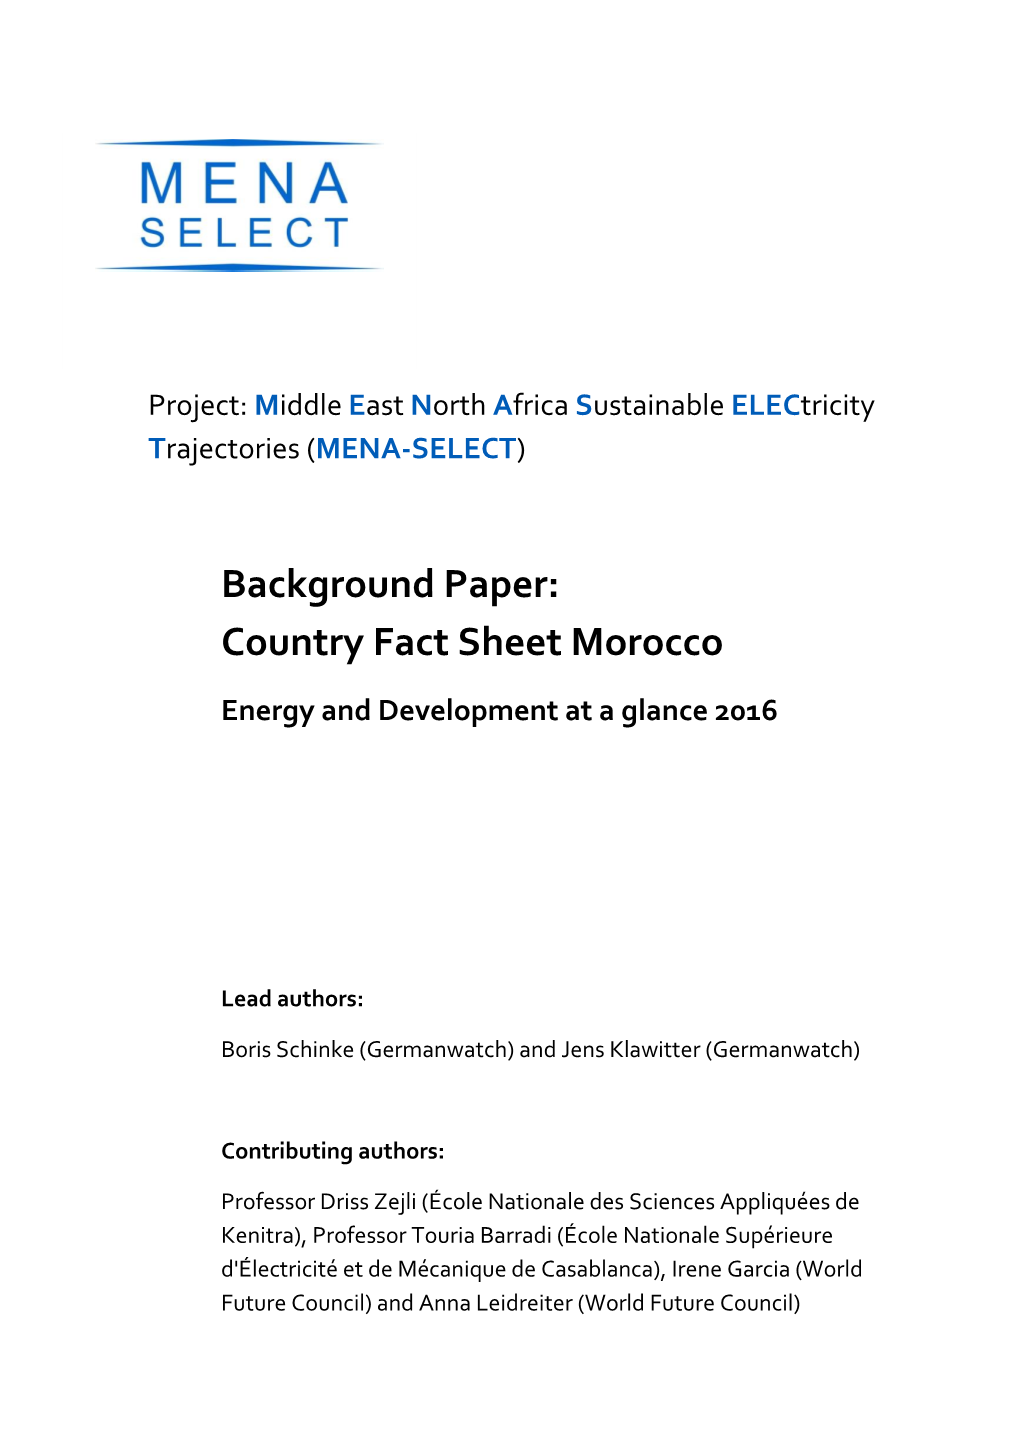 Background Paper: Country Fact Sheet Morocco. Energy And